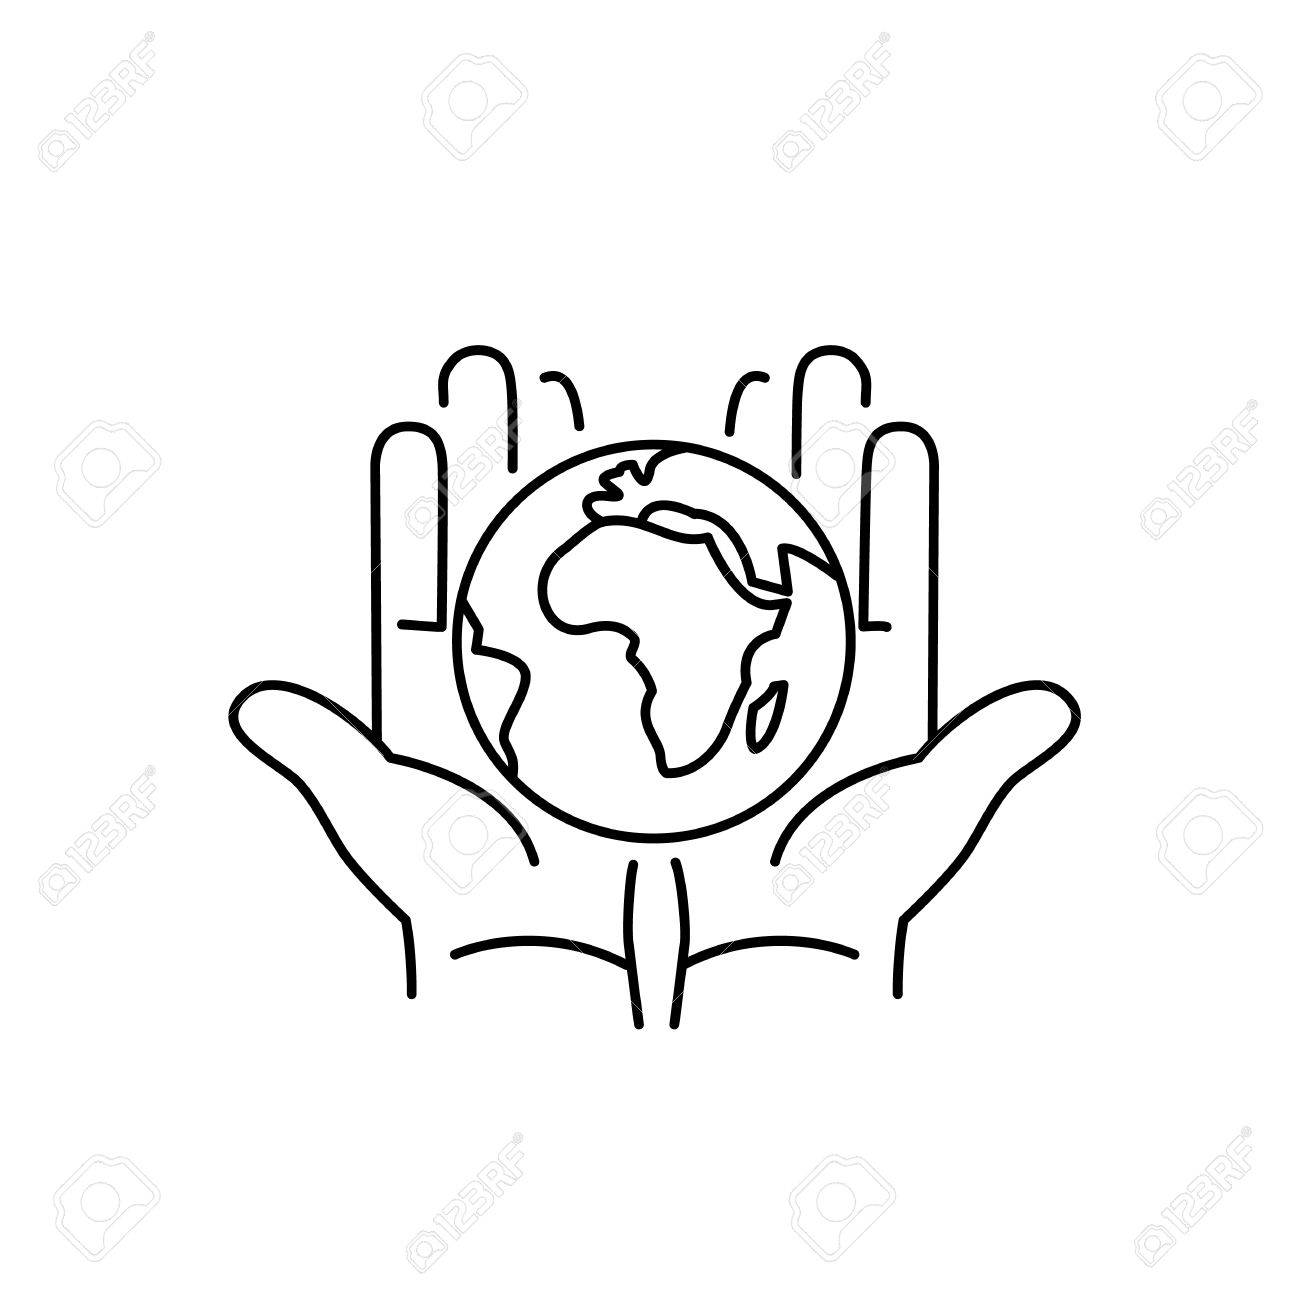 Hands Holding Globe Logo - Hands Holding World Drawing at GetDrawings.com | Free for personal ...